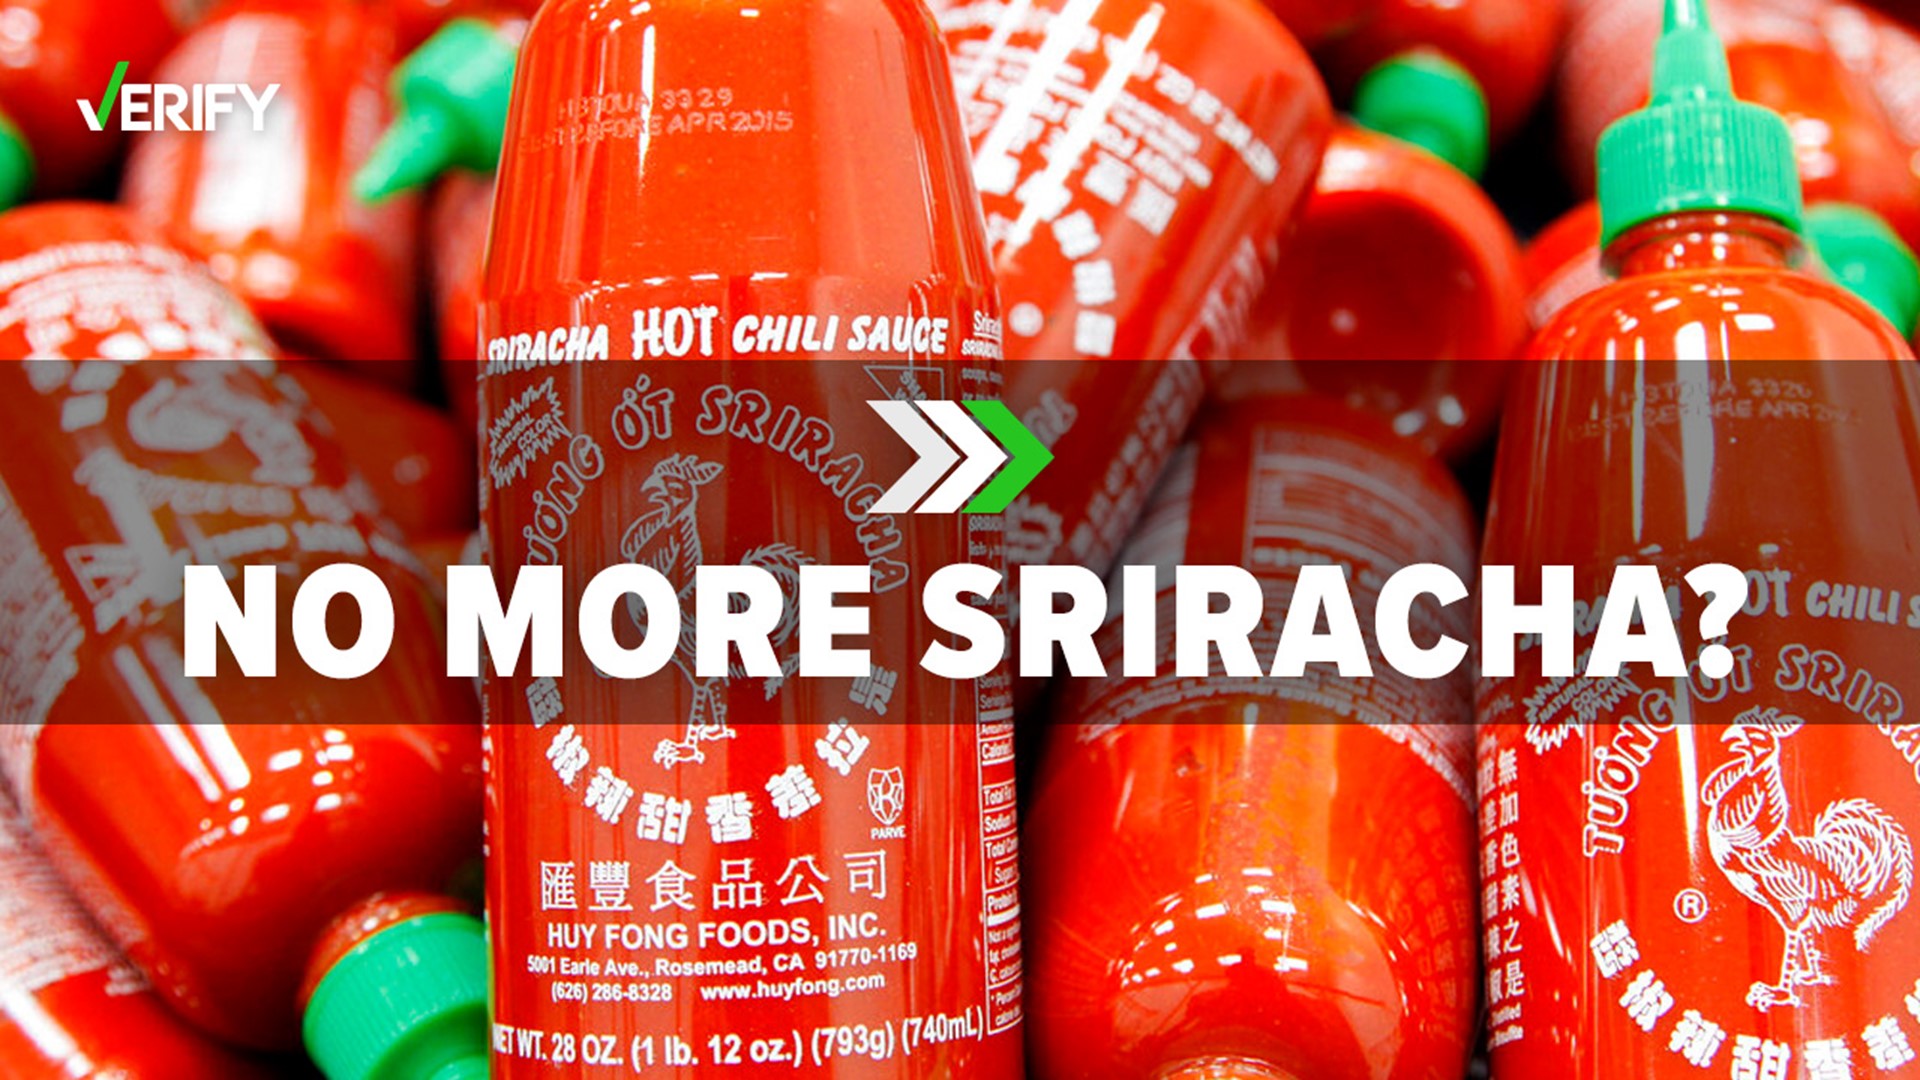 Production of Sriracha hot chili sauce has been suspended until further notice due to a “severe” chili pepper shortage, Huy Fong Foods, Inc. says.